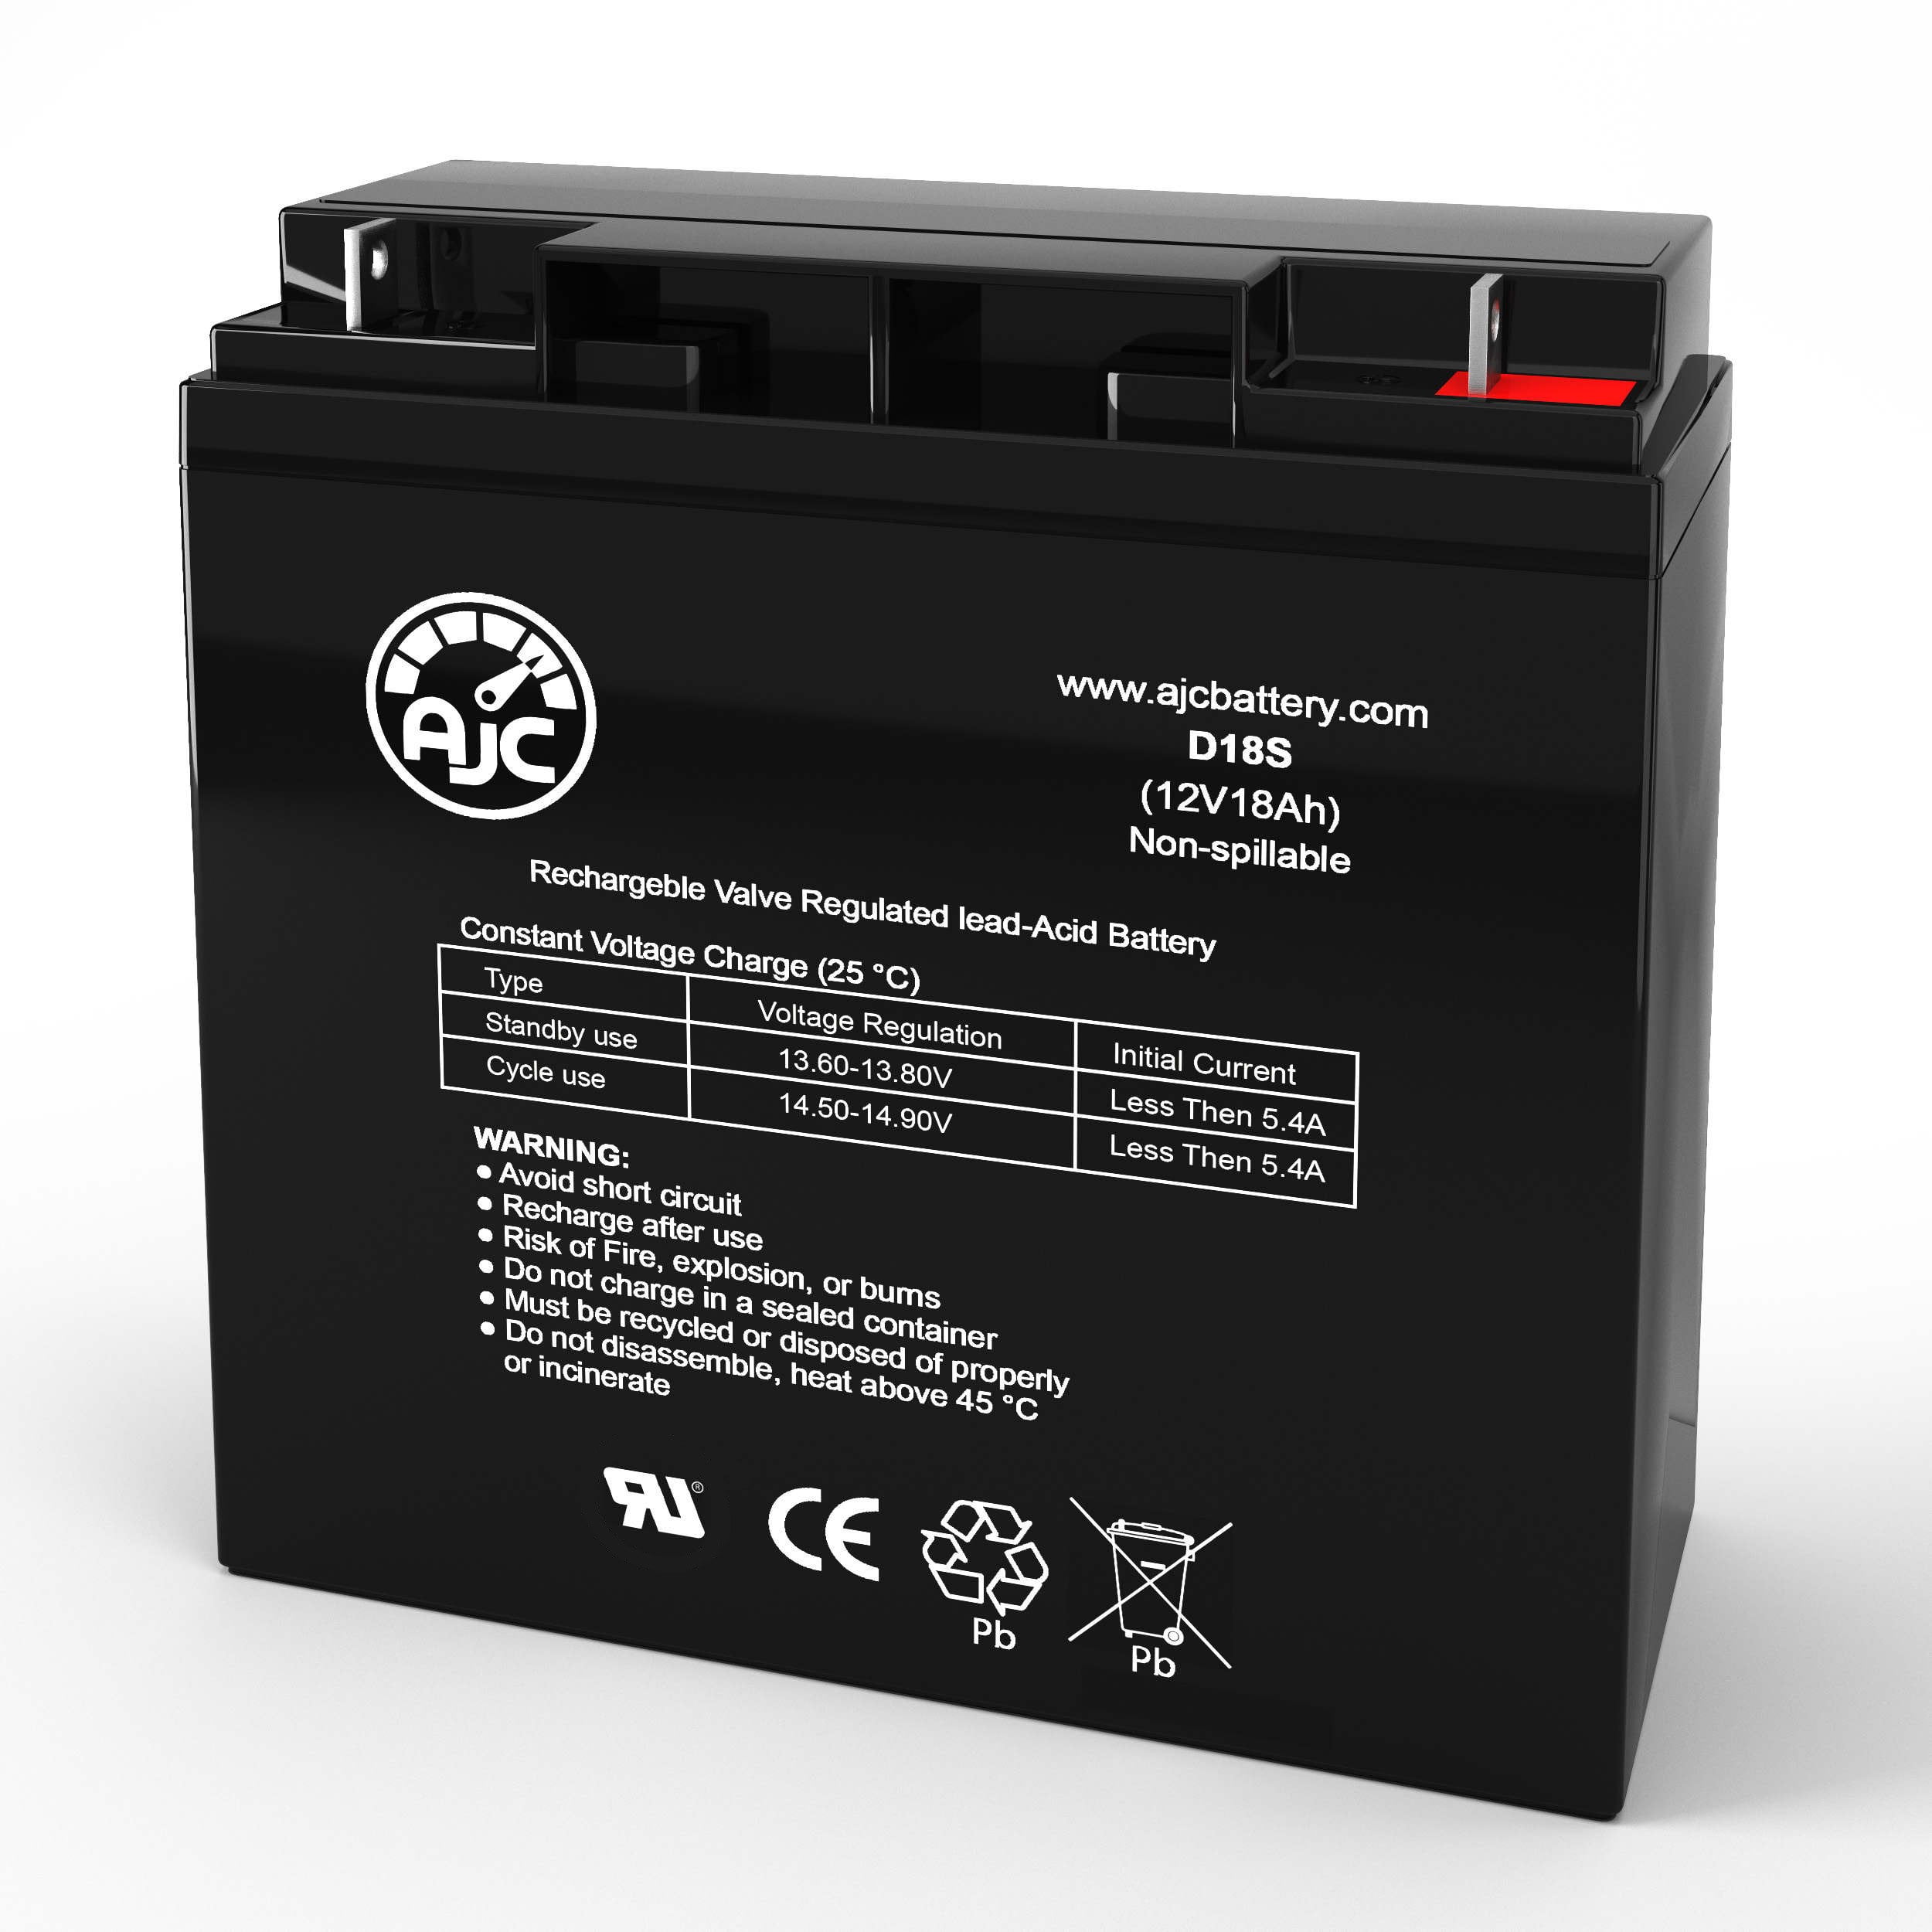 Cruzin Cooler 500 Watt 12V 18Ah Electric Scooter Battery - This Is an AJC Brand Replacement